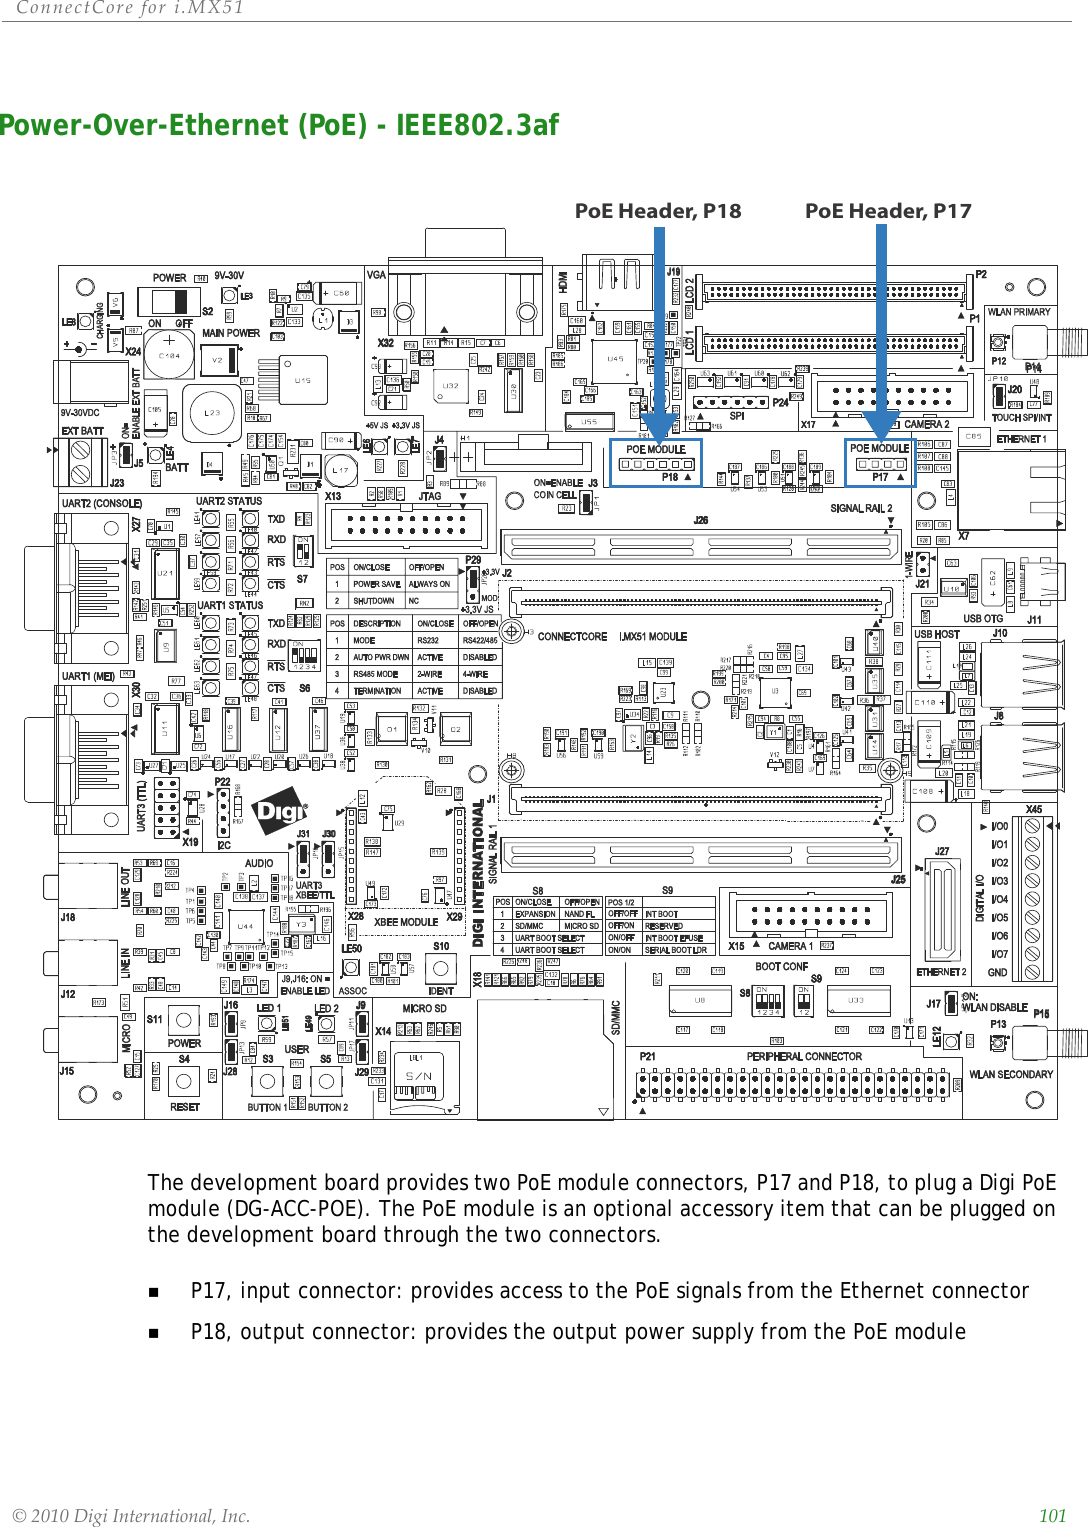 ConnectCorefori.MX51©2010DigiInternational,Inc. 101Power-Over-Ethernet (PoE) - IEEE802.3afThe development board provides two PoE module connectors, P17 and P18, to plug a Digi PoE module (DG-ACC-POE). The PoE module is an optional accessory item that can be plugged on the development board through the two connectors.P17, input connector: provides access to the PoE signals from the Ethernet connectorP18, output connector: provides the output power supply from the PoE modulePoE Header, P18 PoE Header, P17